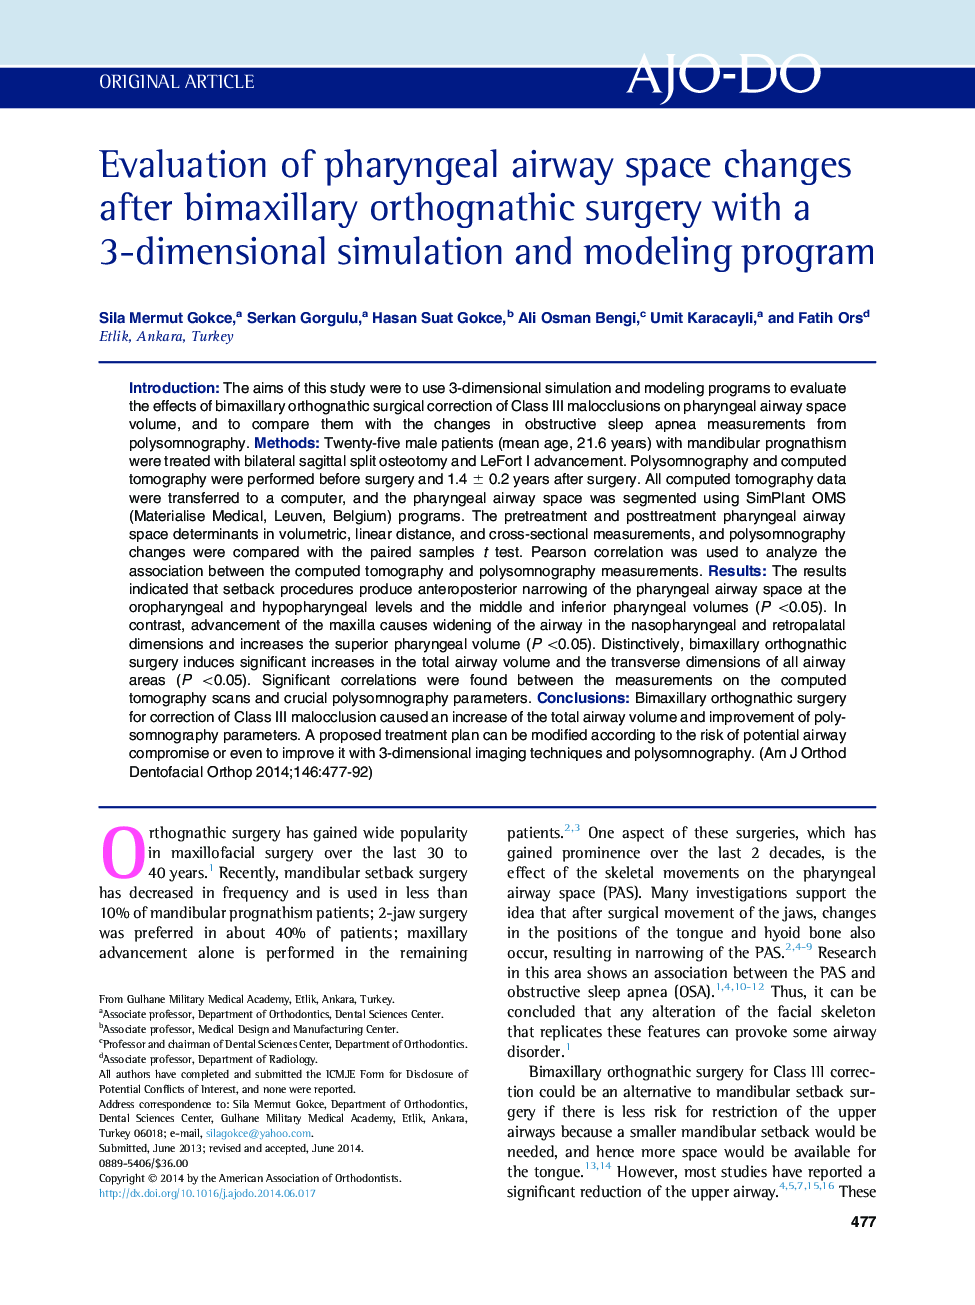 Evaluation of pharyngeal airway space changes after bimaxillary orthognathic surgery with a 3-dimensional simulation and modeling program 